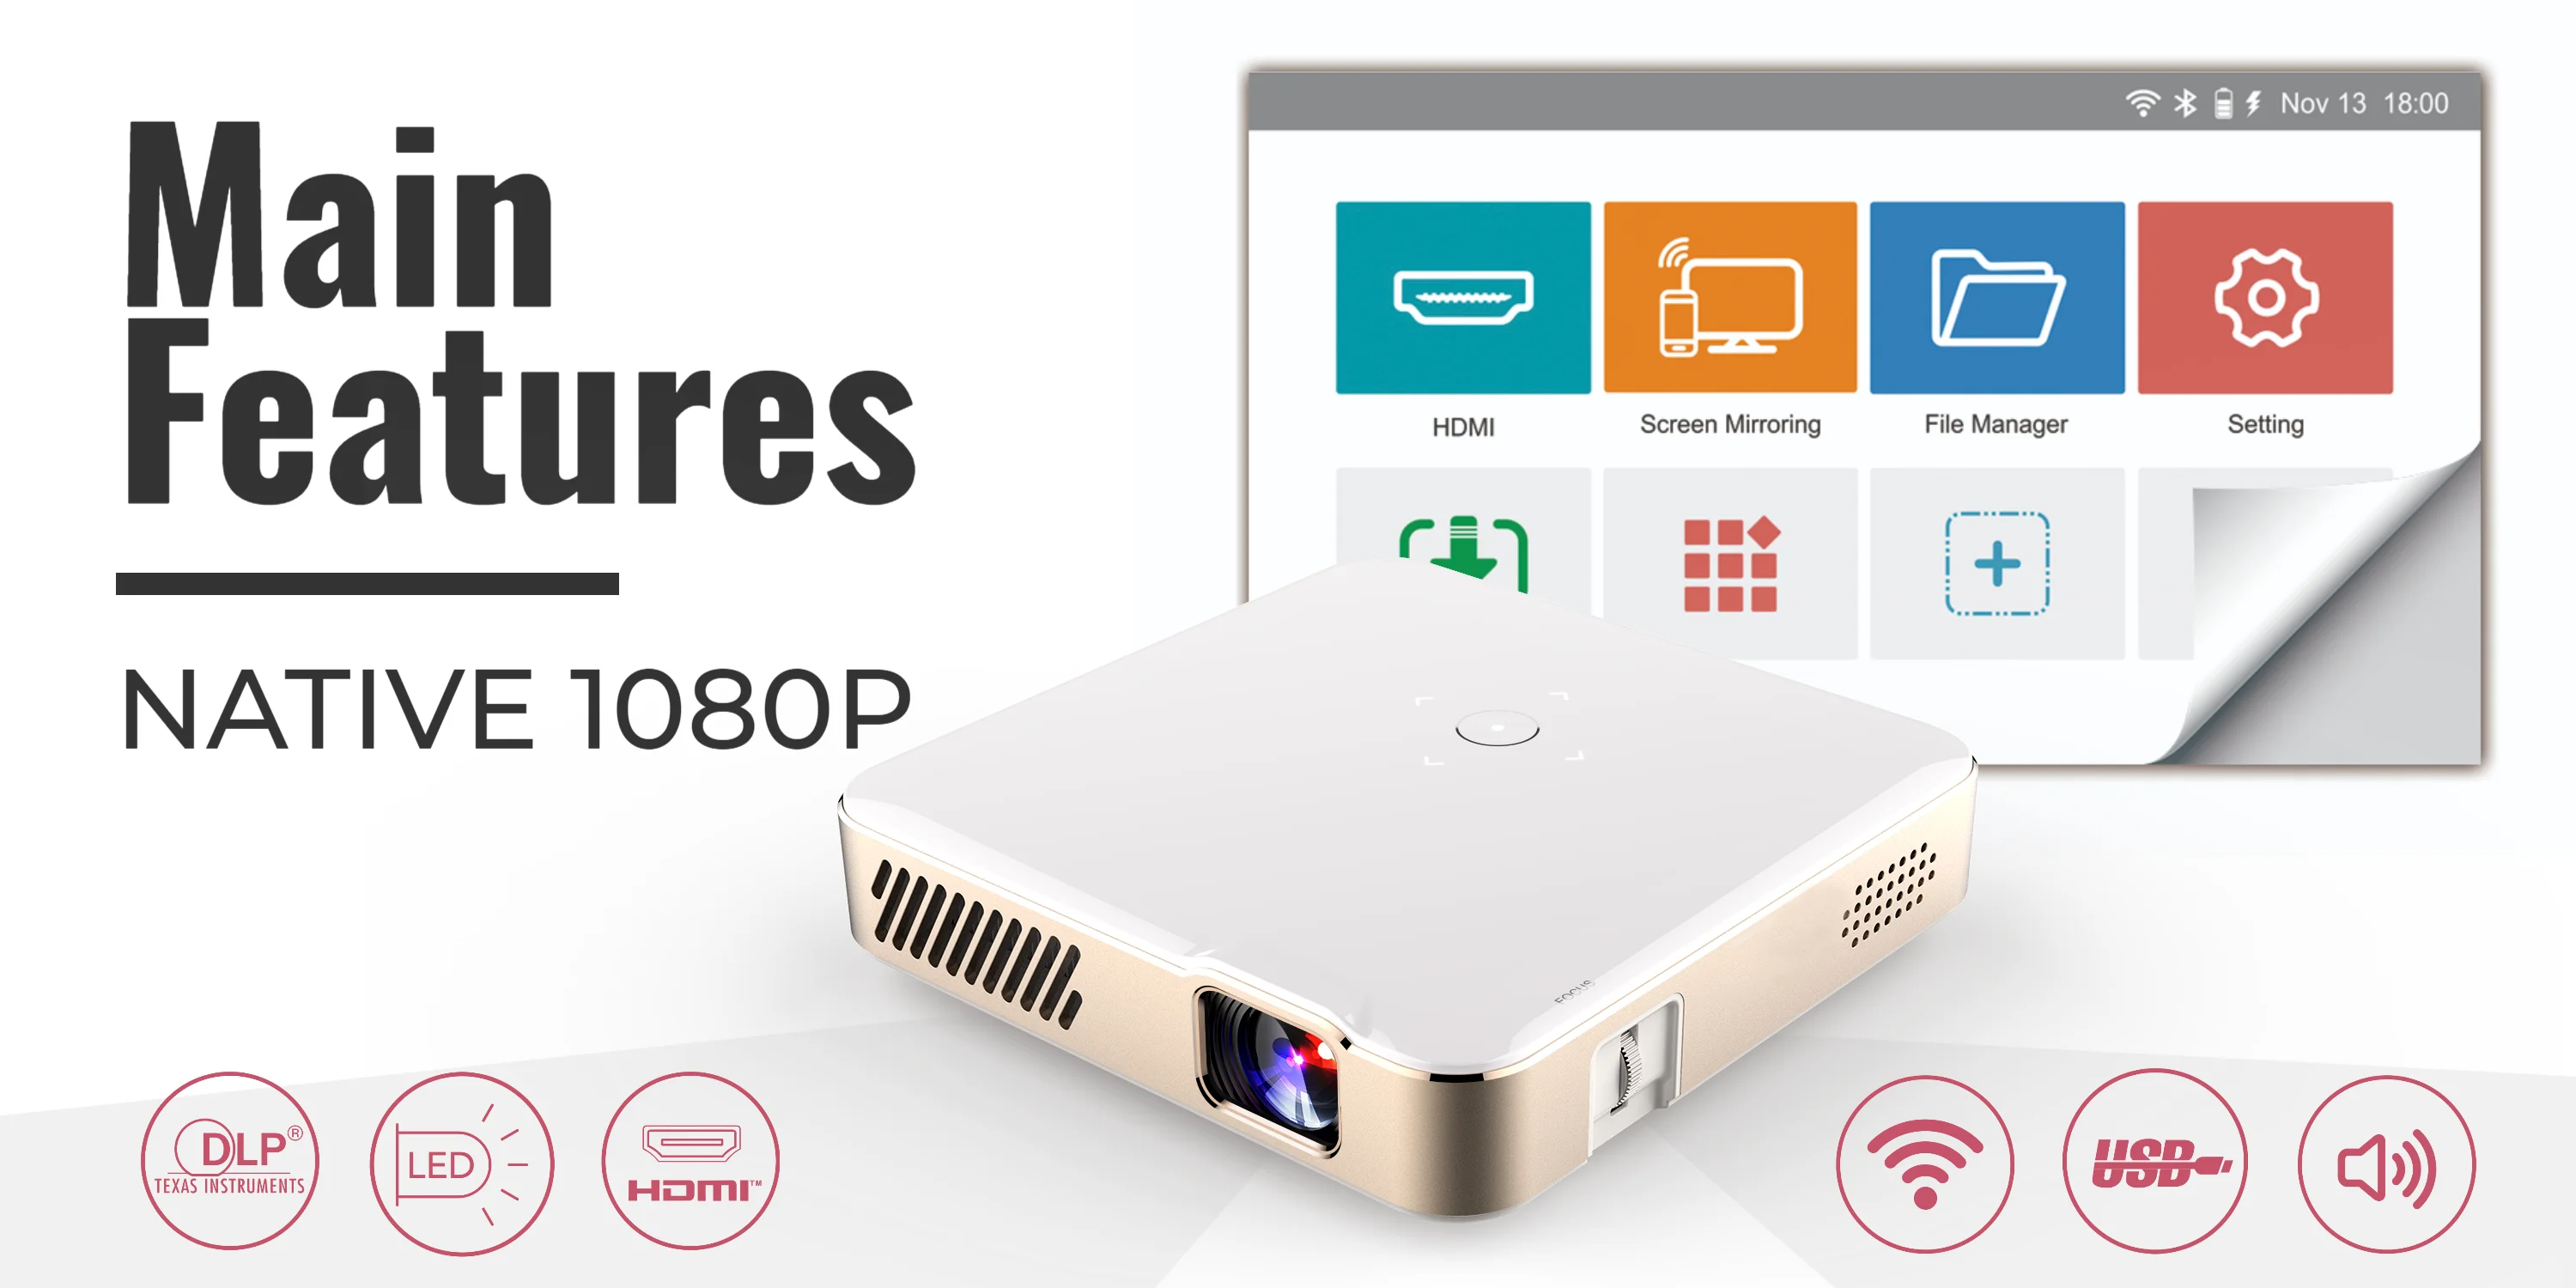 Aome S300 Oem Full Hd Projector 1920 X 1080p Native Tv Beamer Projector - Buy Tv Projector 1080p,Full Hd Projector 1080p Native,Beamer 1920 X 1080 Product on Alibaba.com